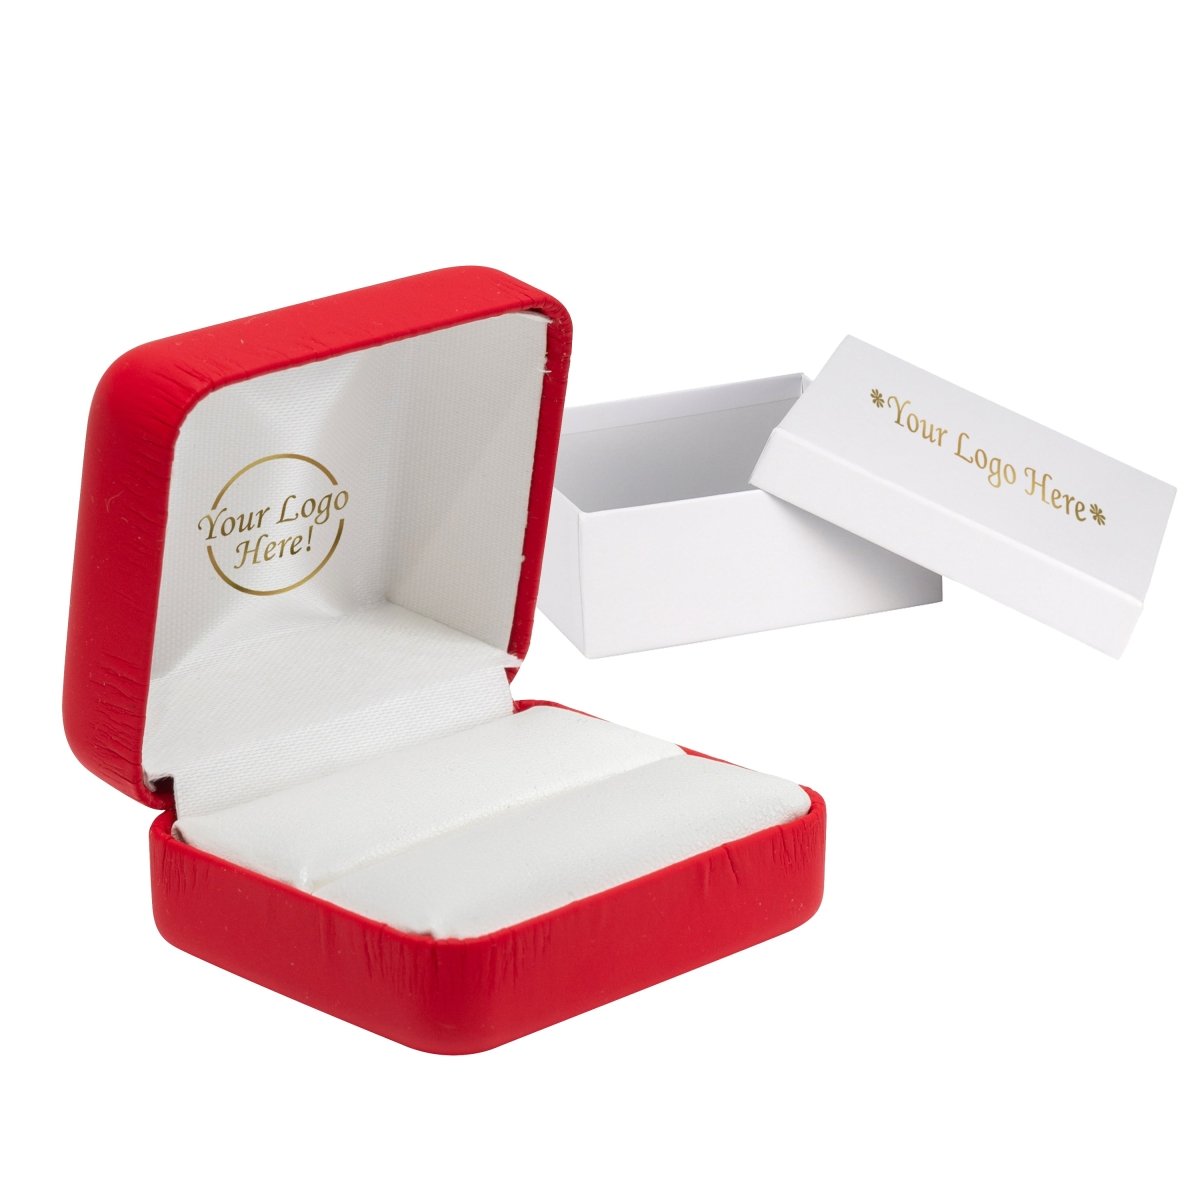 Vibrant Leatherette Double Ring Box - Prestige and Fancy - Red Matte